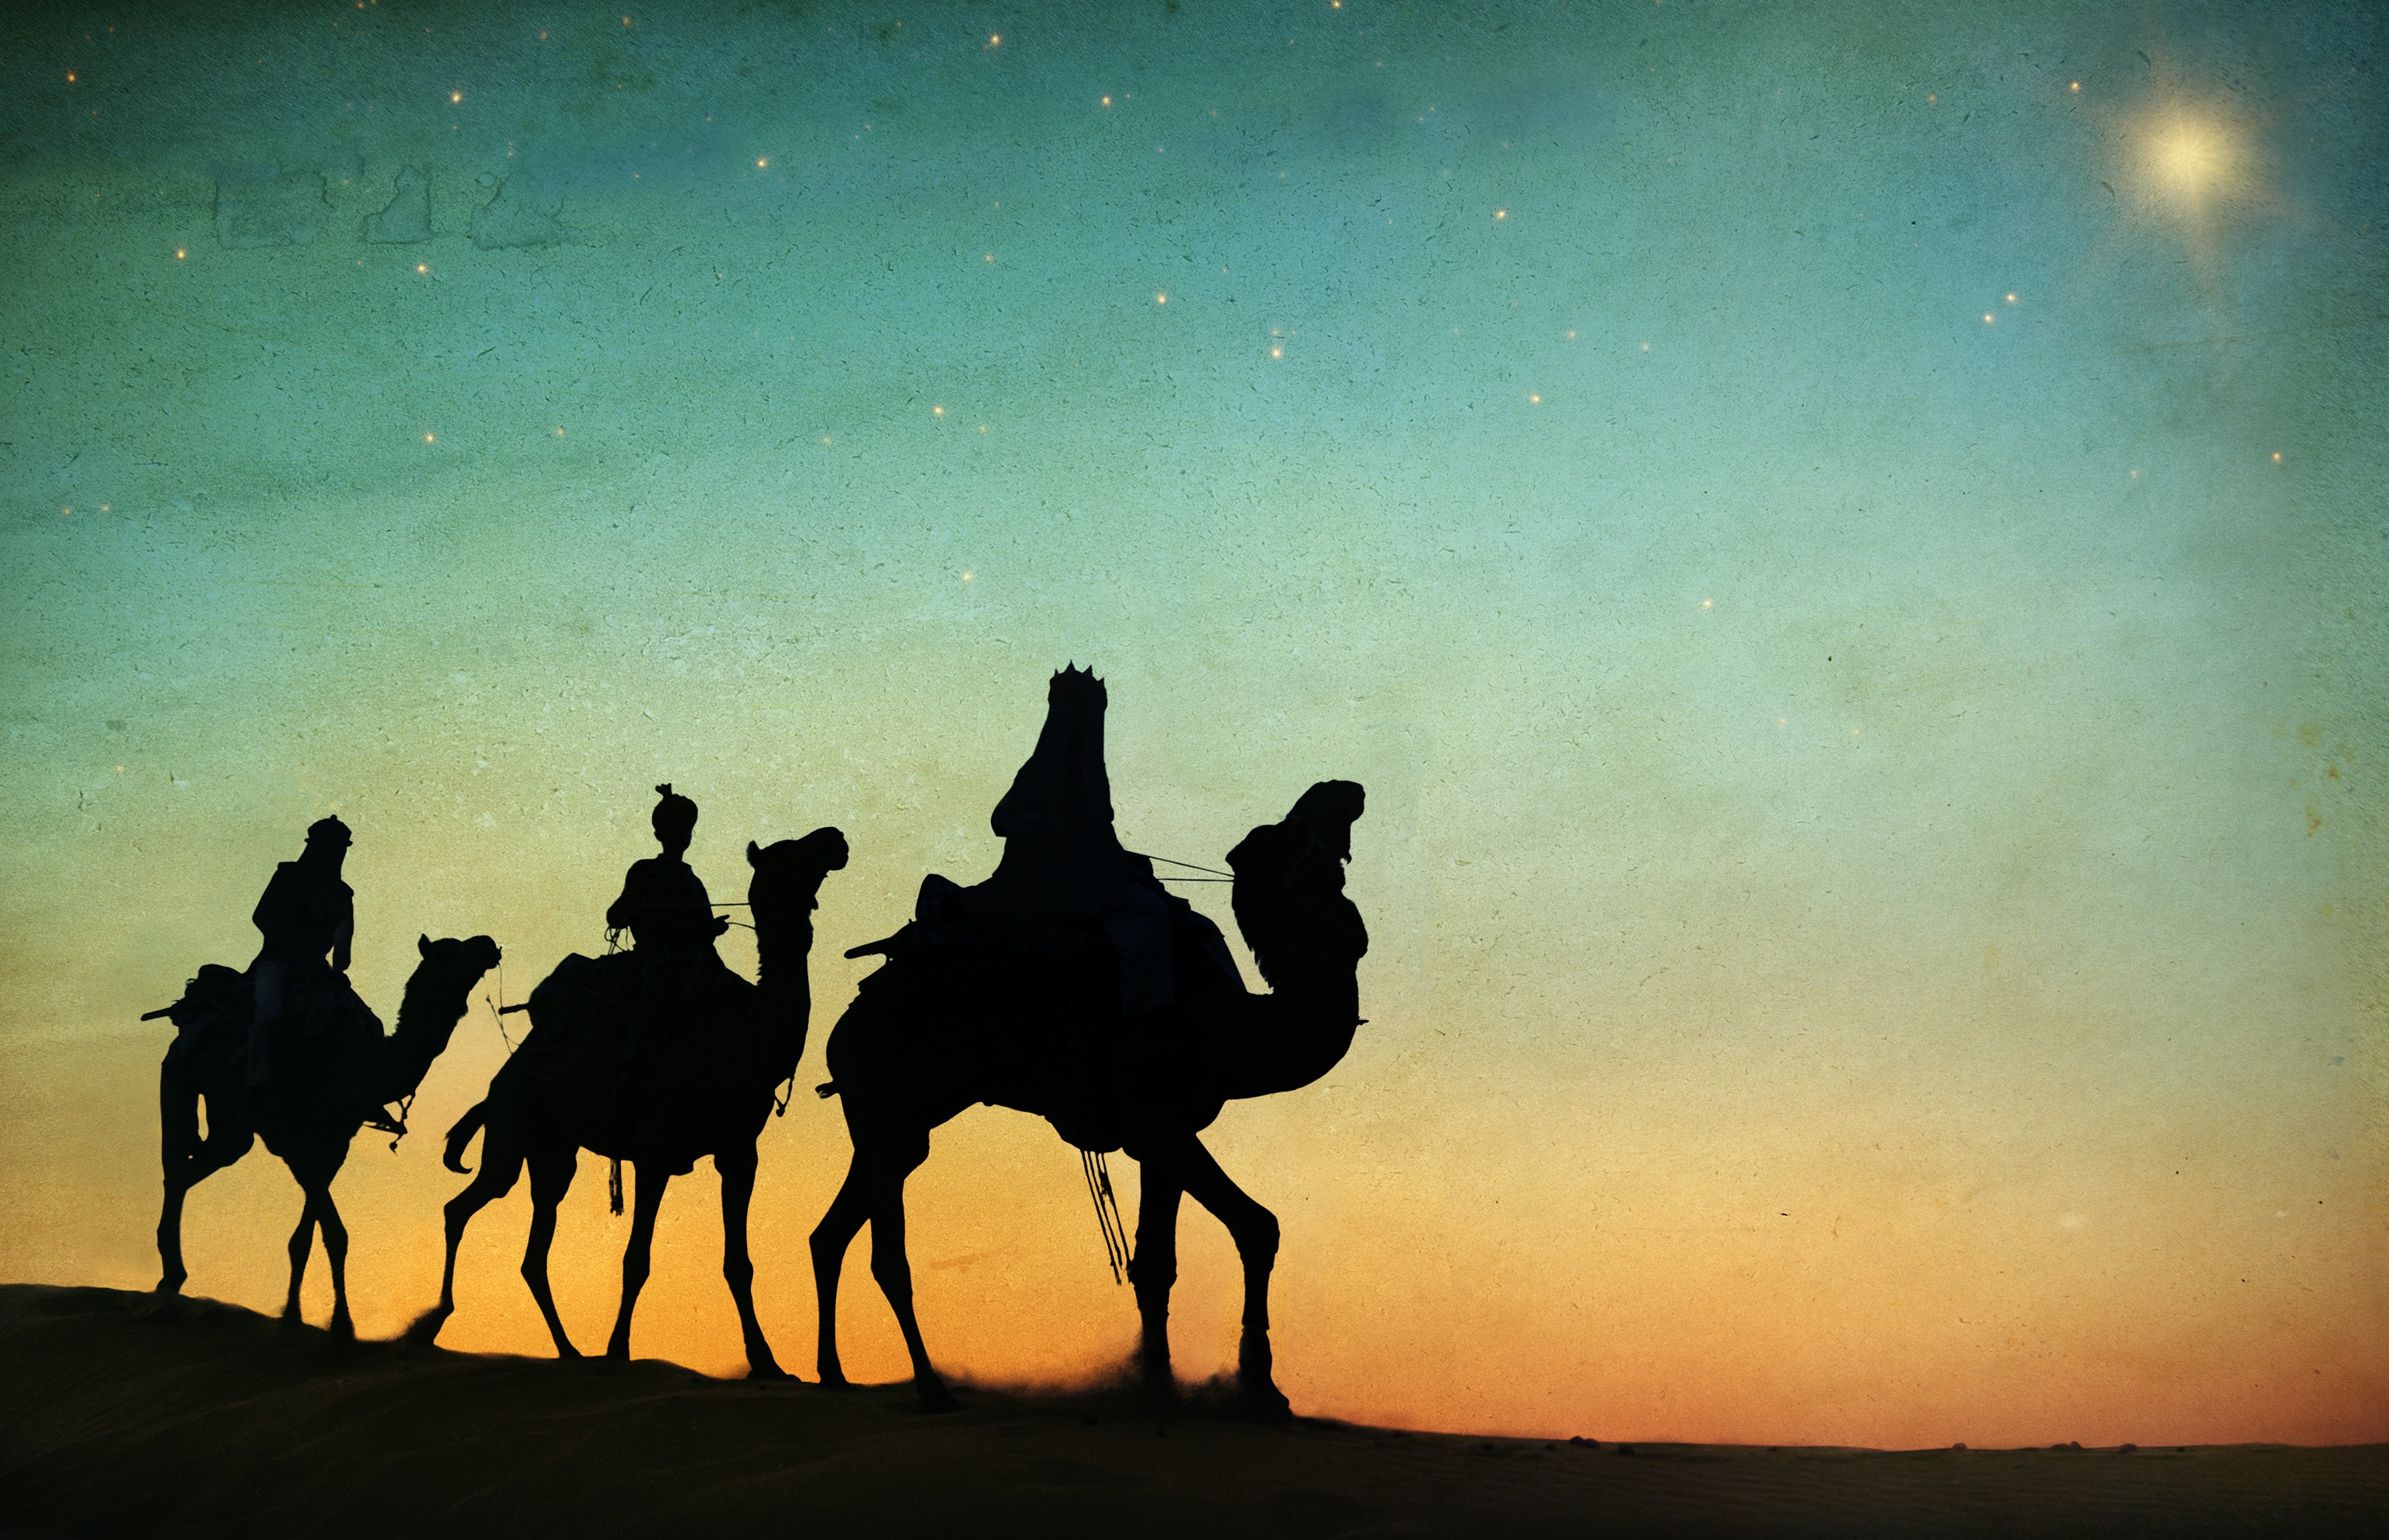 Group of People Riding Camel Isolated on Background